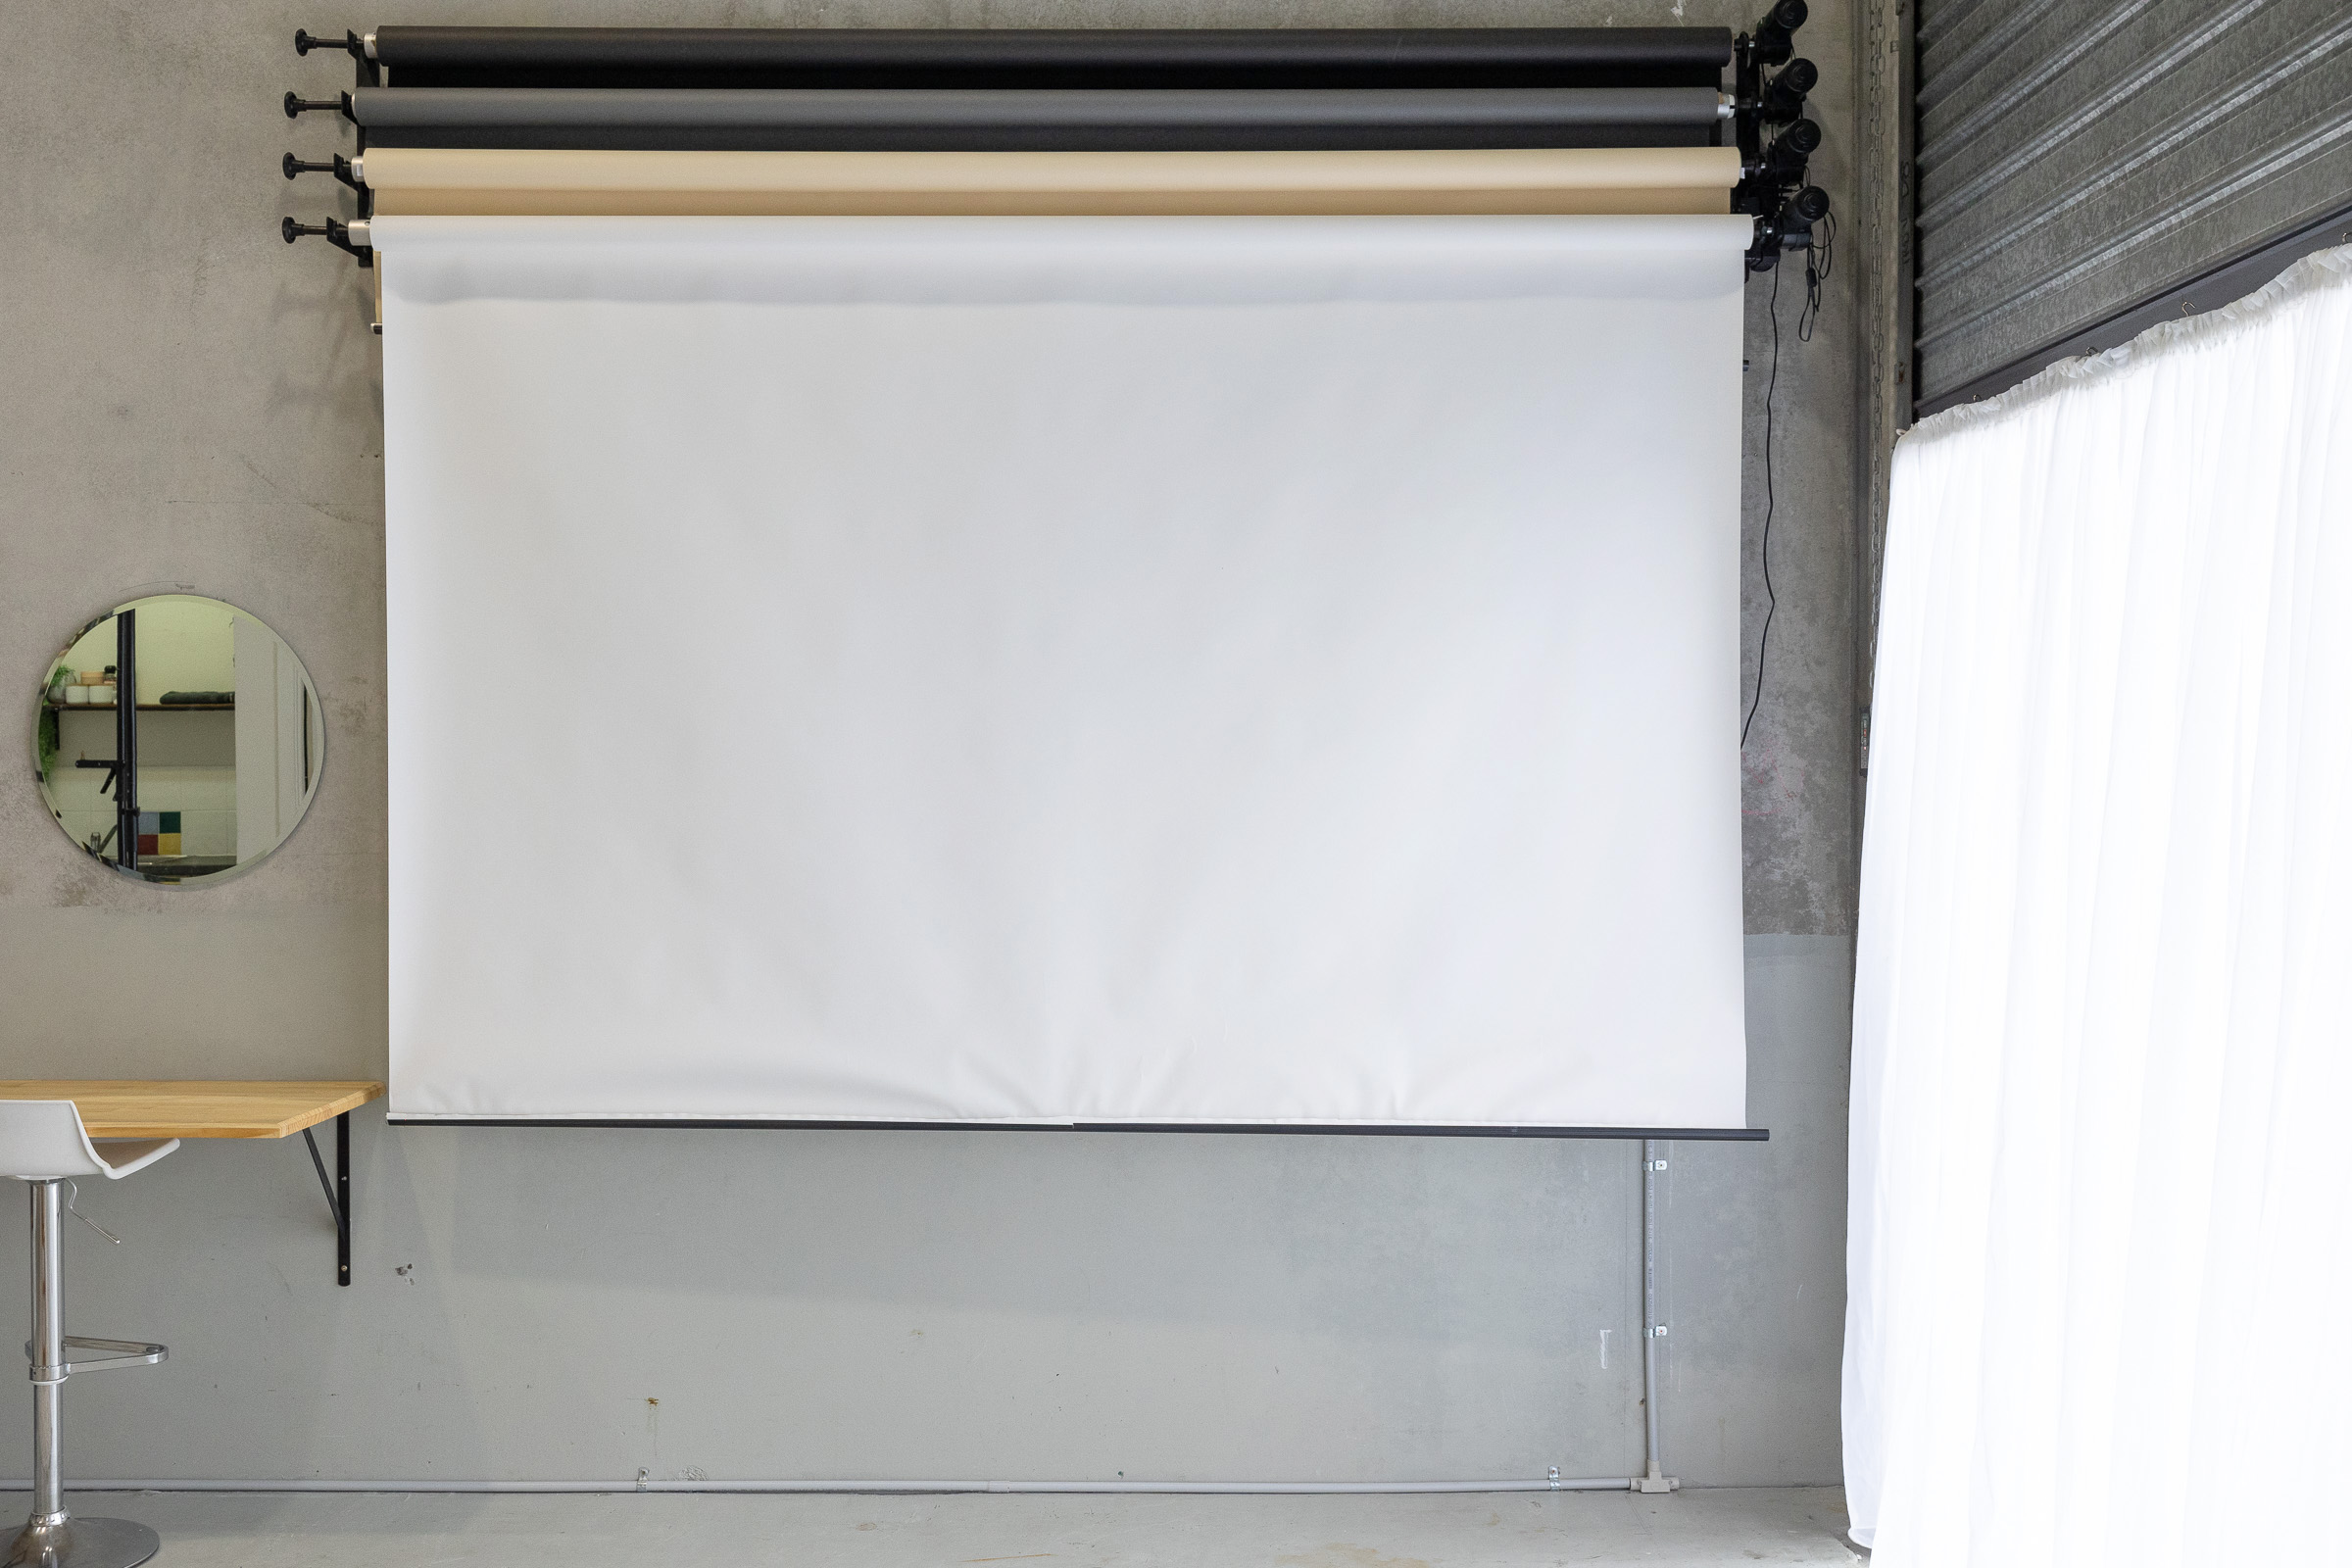 photography studio with 2.7m wide paper backdrop rolls and sheer curtain with daylight through roller door